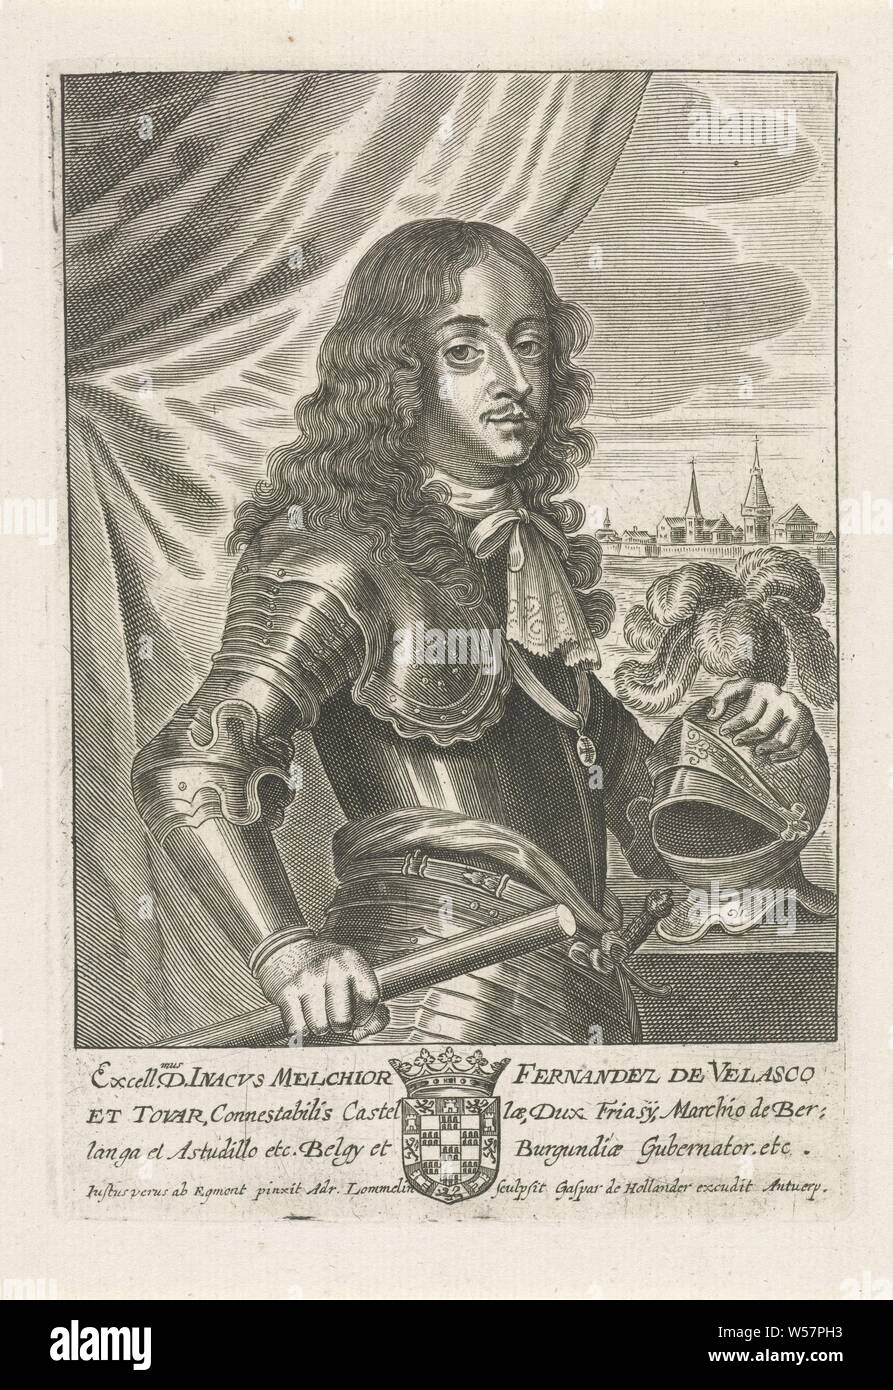 Portrait of Inacho Melchior Ferdinand de Velasco, constable of Velasco and Tovar, governor of Belgium and Burgundy. In the margin the family crest of the person portrayed, Inacho Melchior Ferdinand de, constable of Velasco, Adriaen Lommelin (mentioned on object), Antwerp, 1652 - 1677, paper, engraving, h 182 mm × w 125 mm Stock Photo